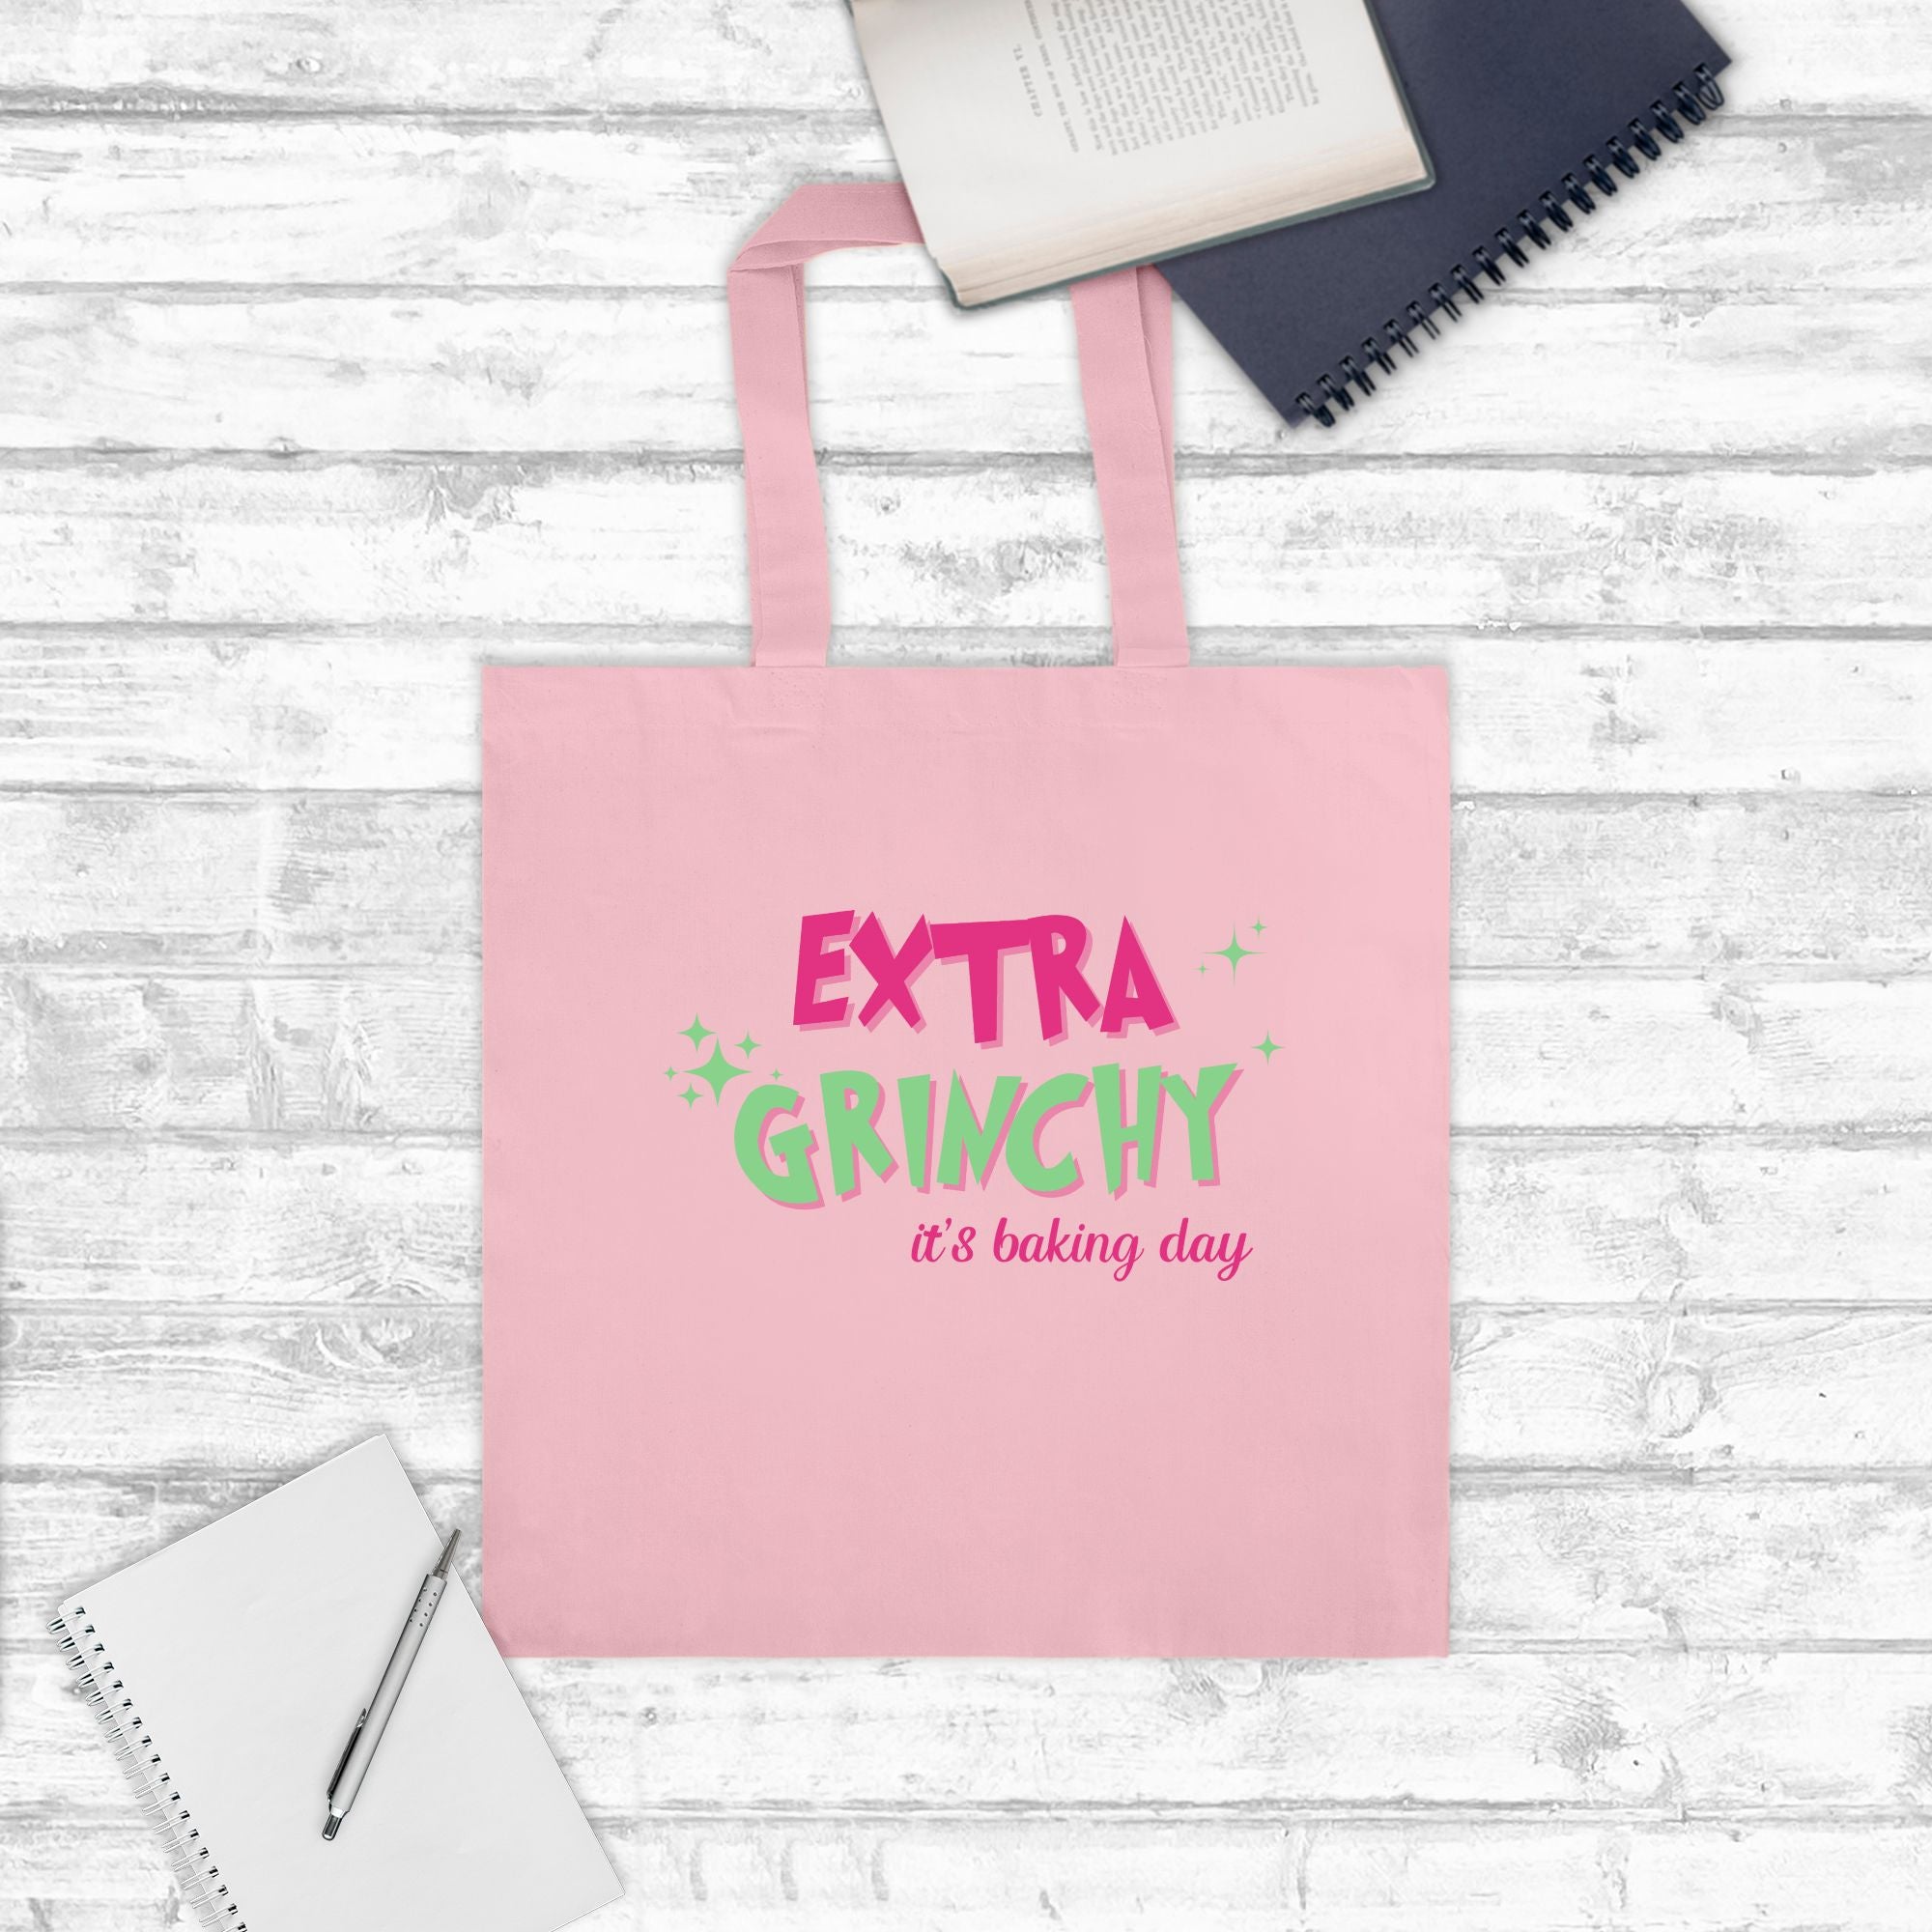 Extra Grinchy (It's Baking Day) tote bag